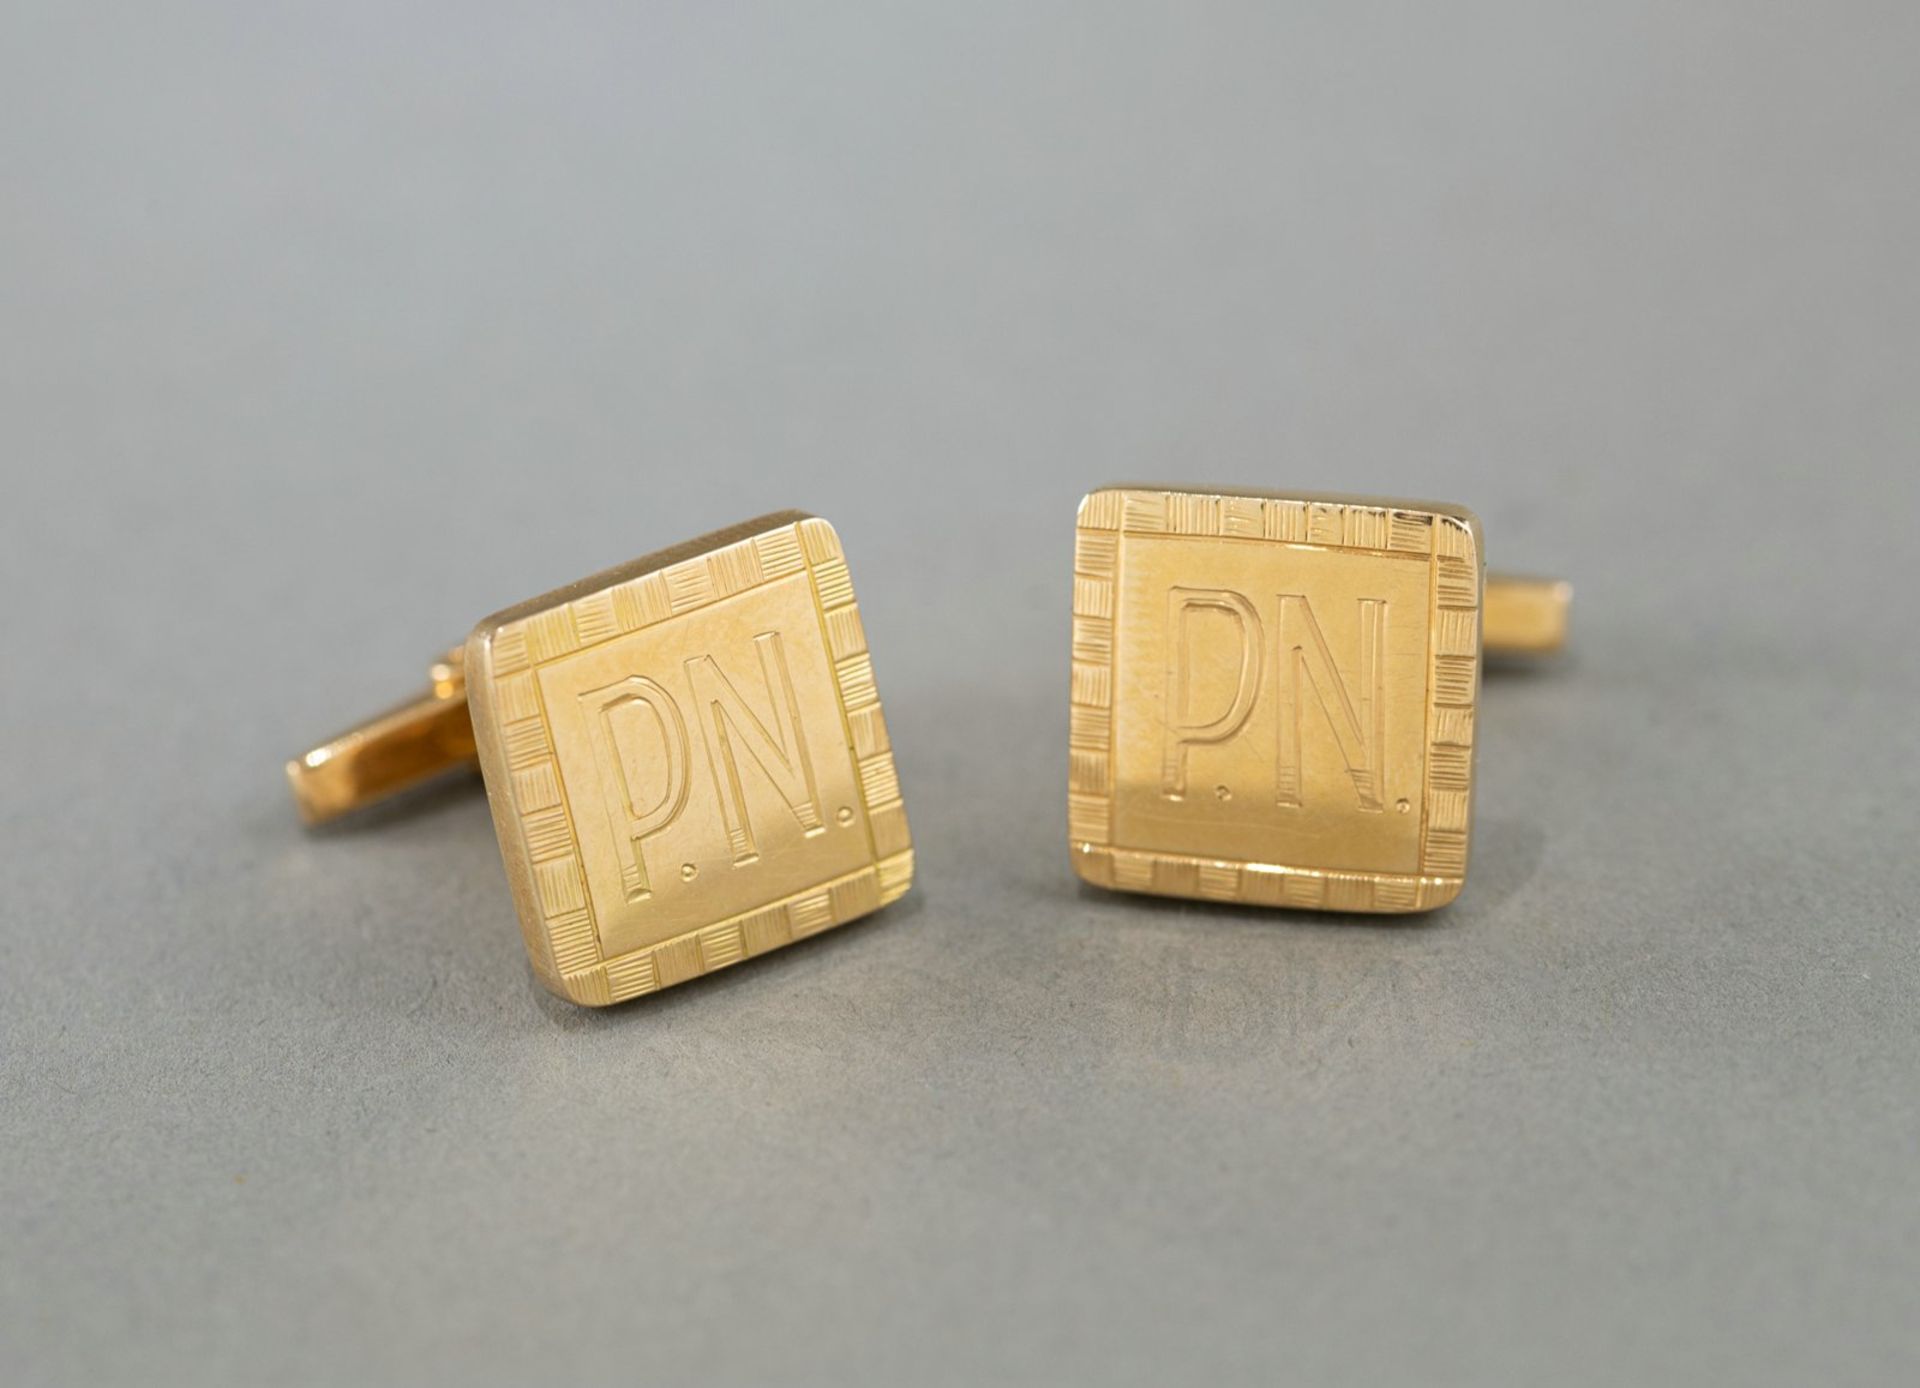 A PAIR OF GOLD CUFF LINKS WITH MONOGRAM - Image 3 of 4